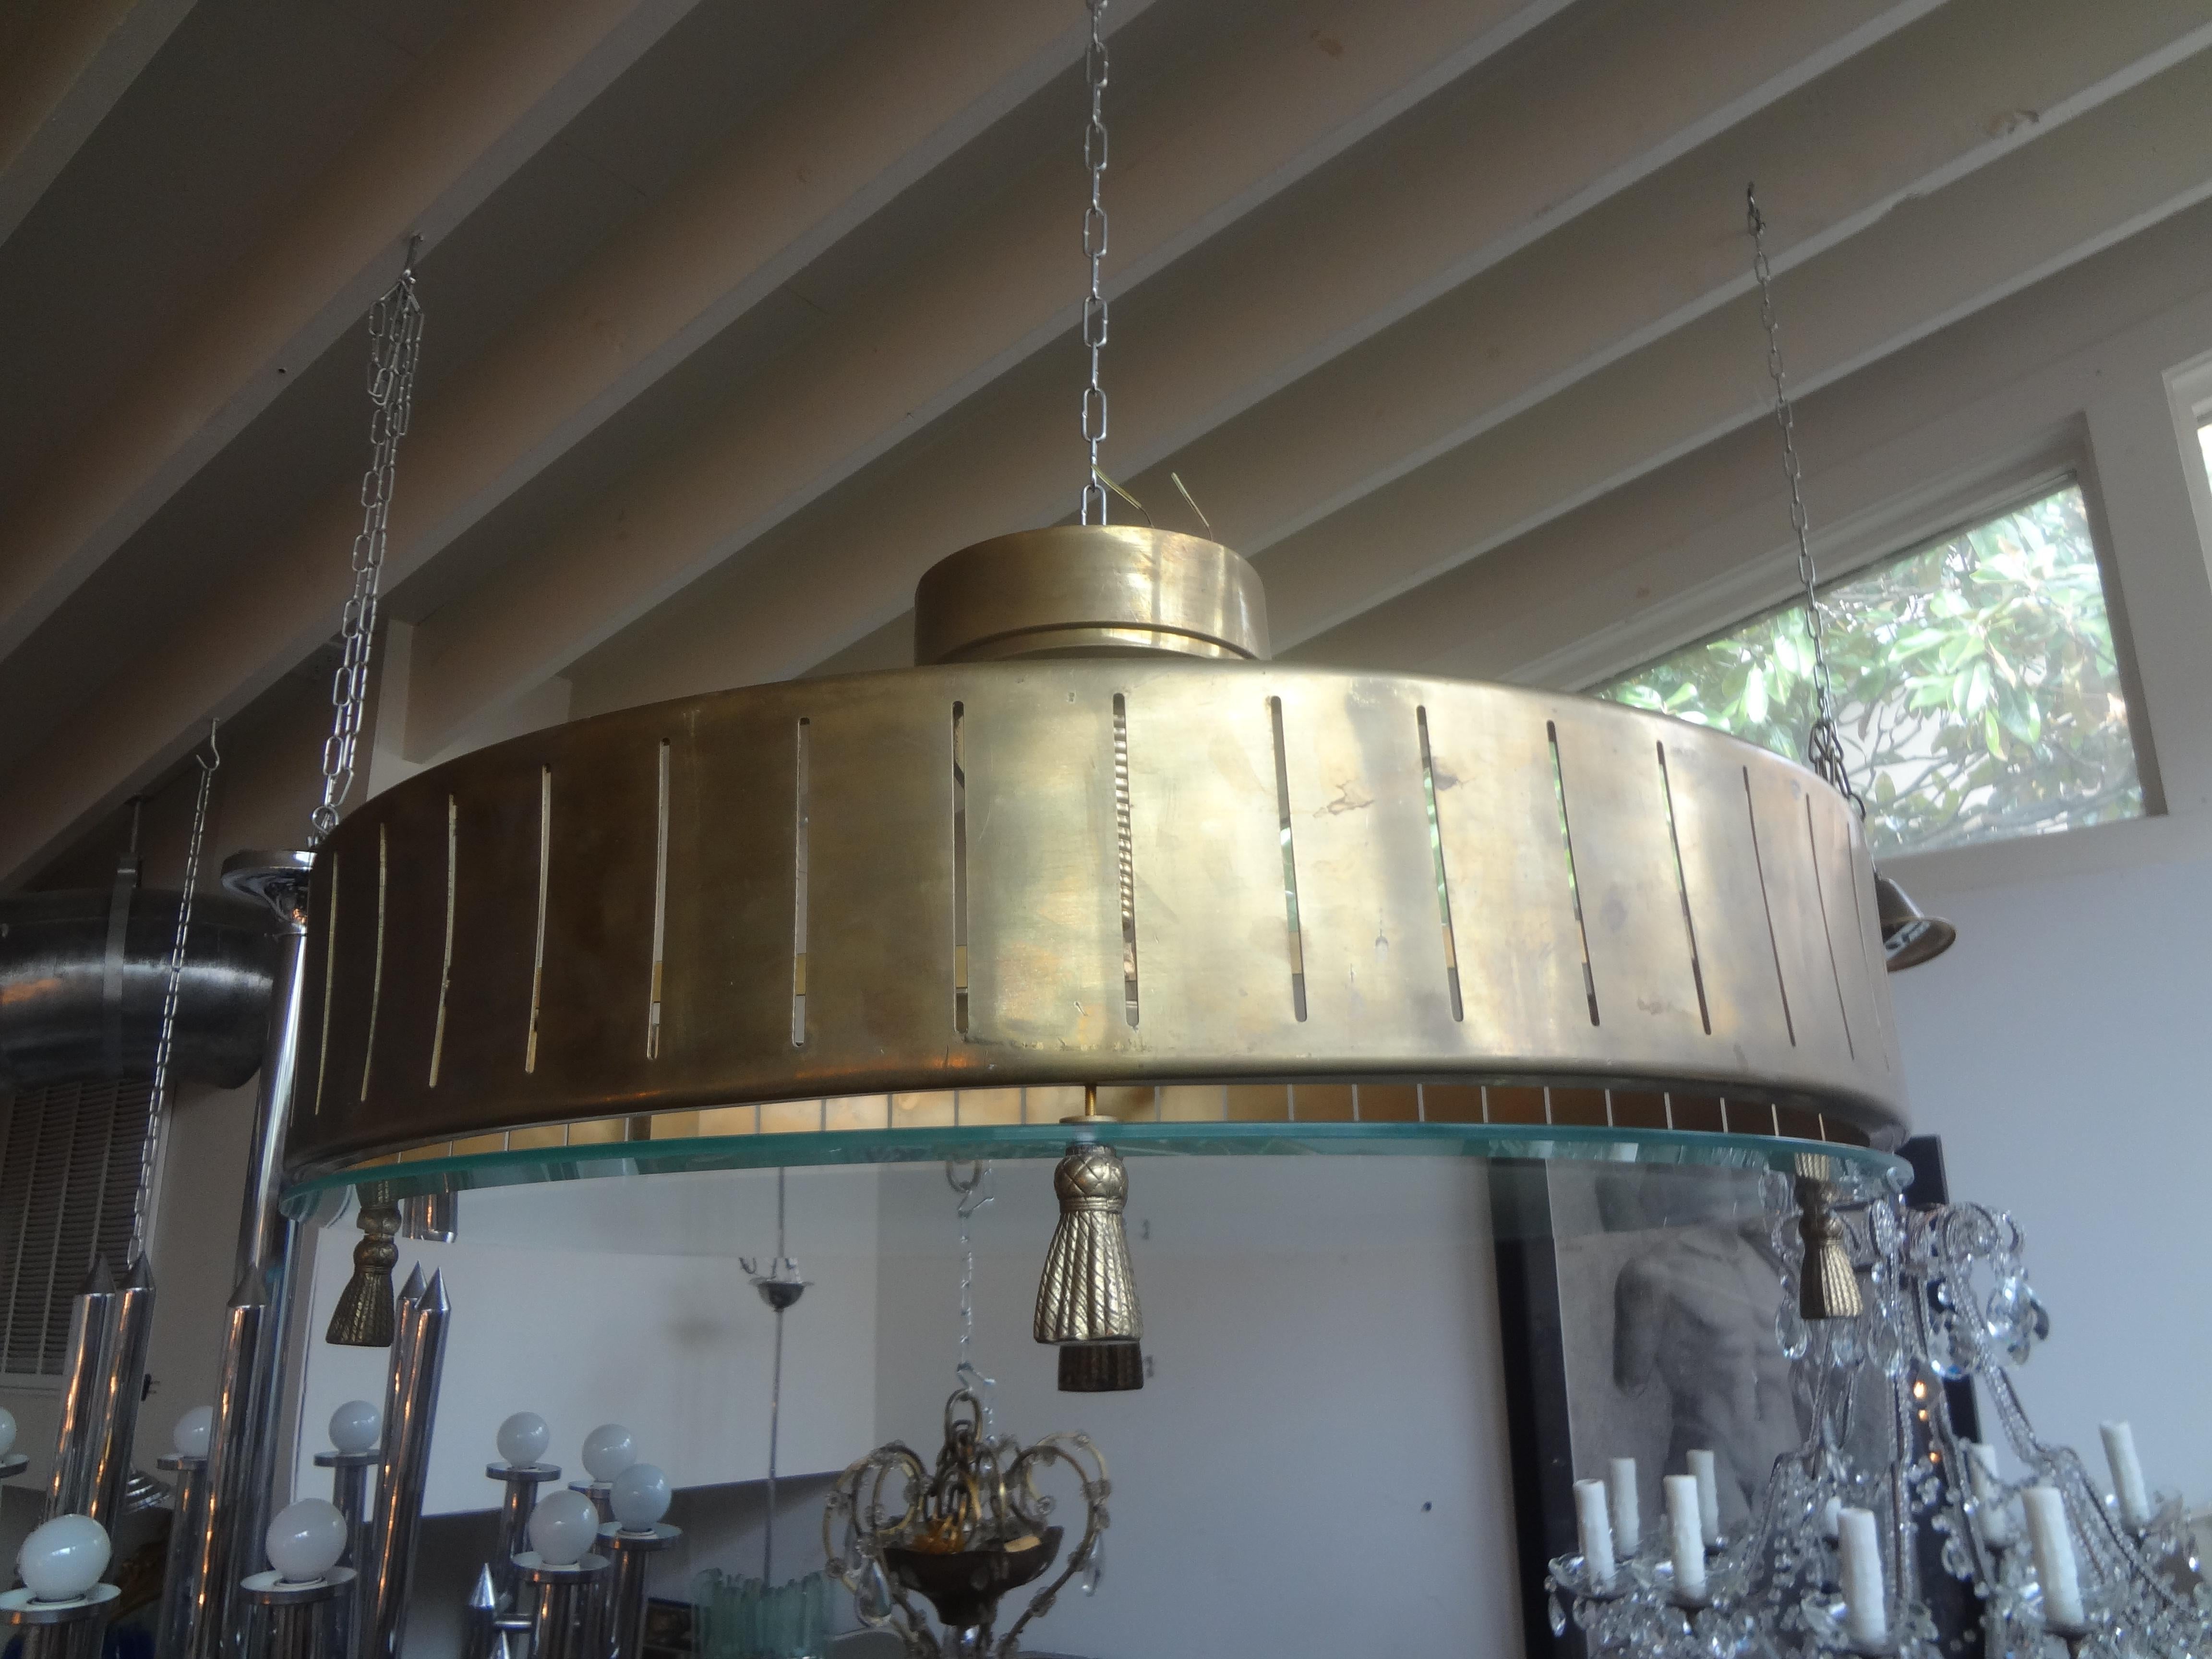 Italian Modern brass and glass chandelier with tassels.
This stunning and unusual Italian brass chandelier has a frosted glass bottom with tassel detail. Our Italian Art Deco inspired brass chandelier has been newly wired with new sockets for the